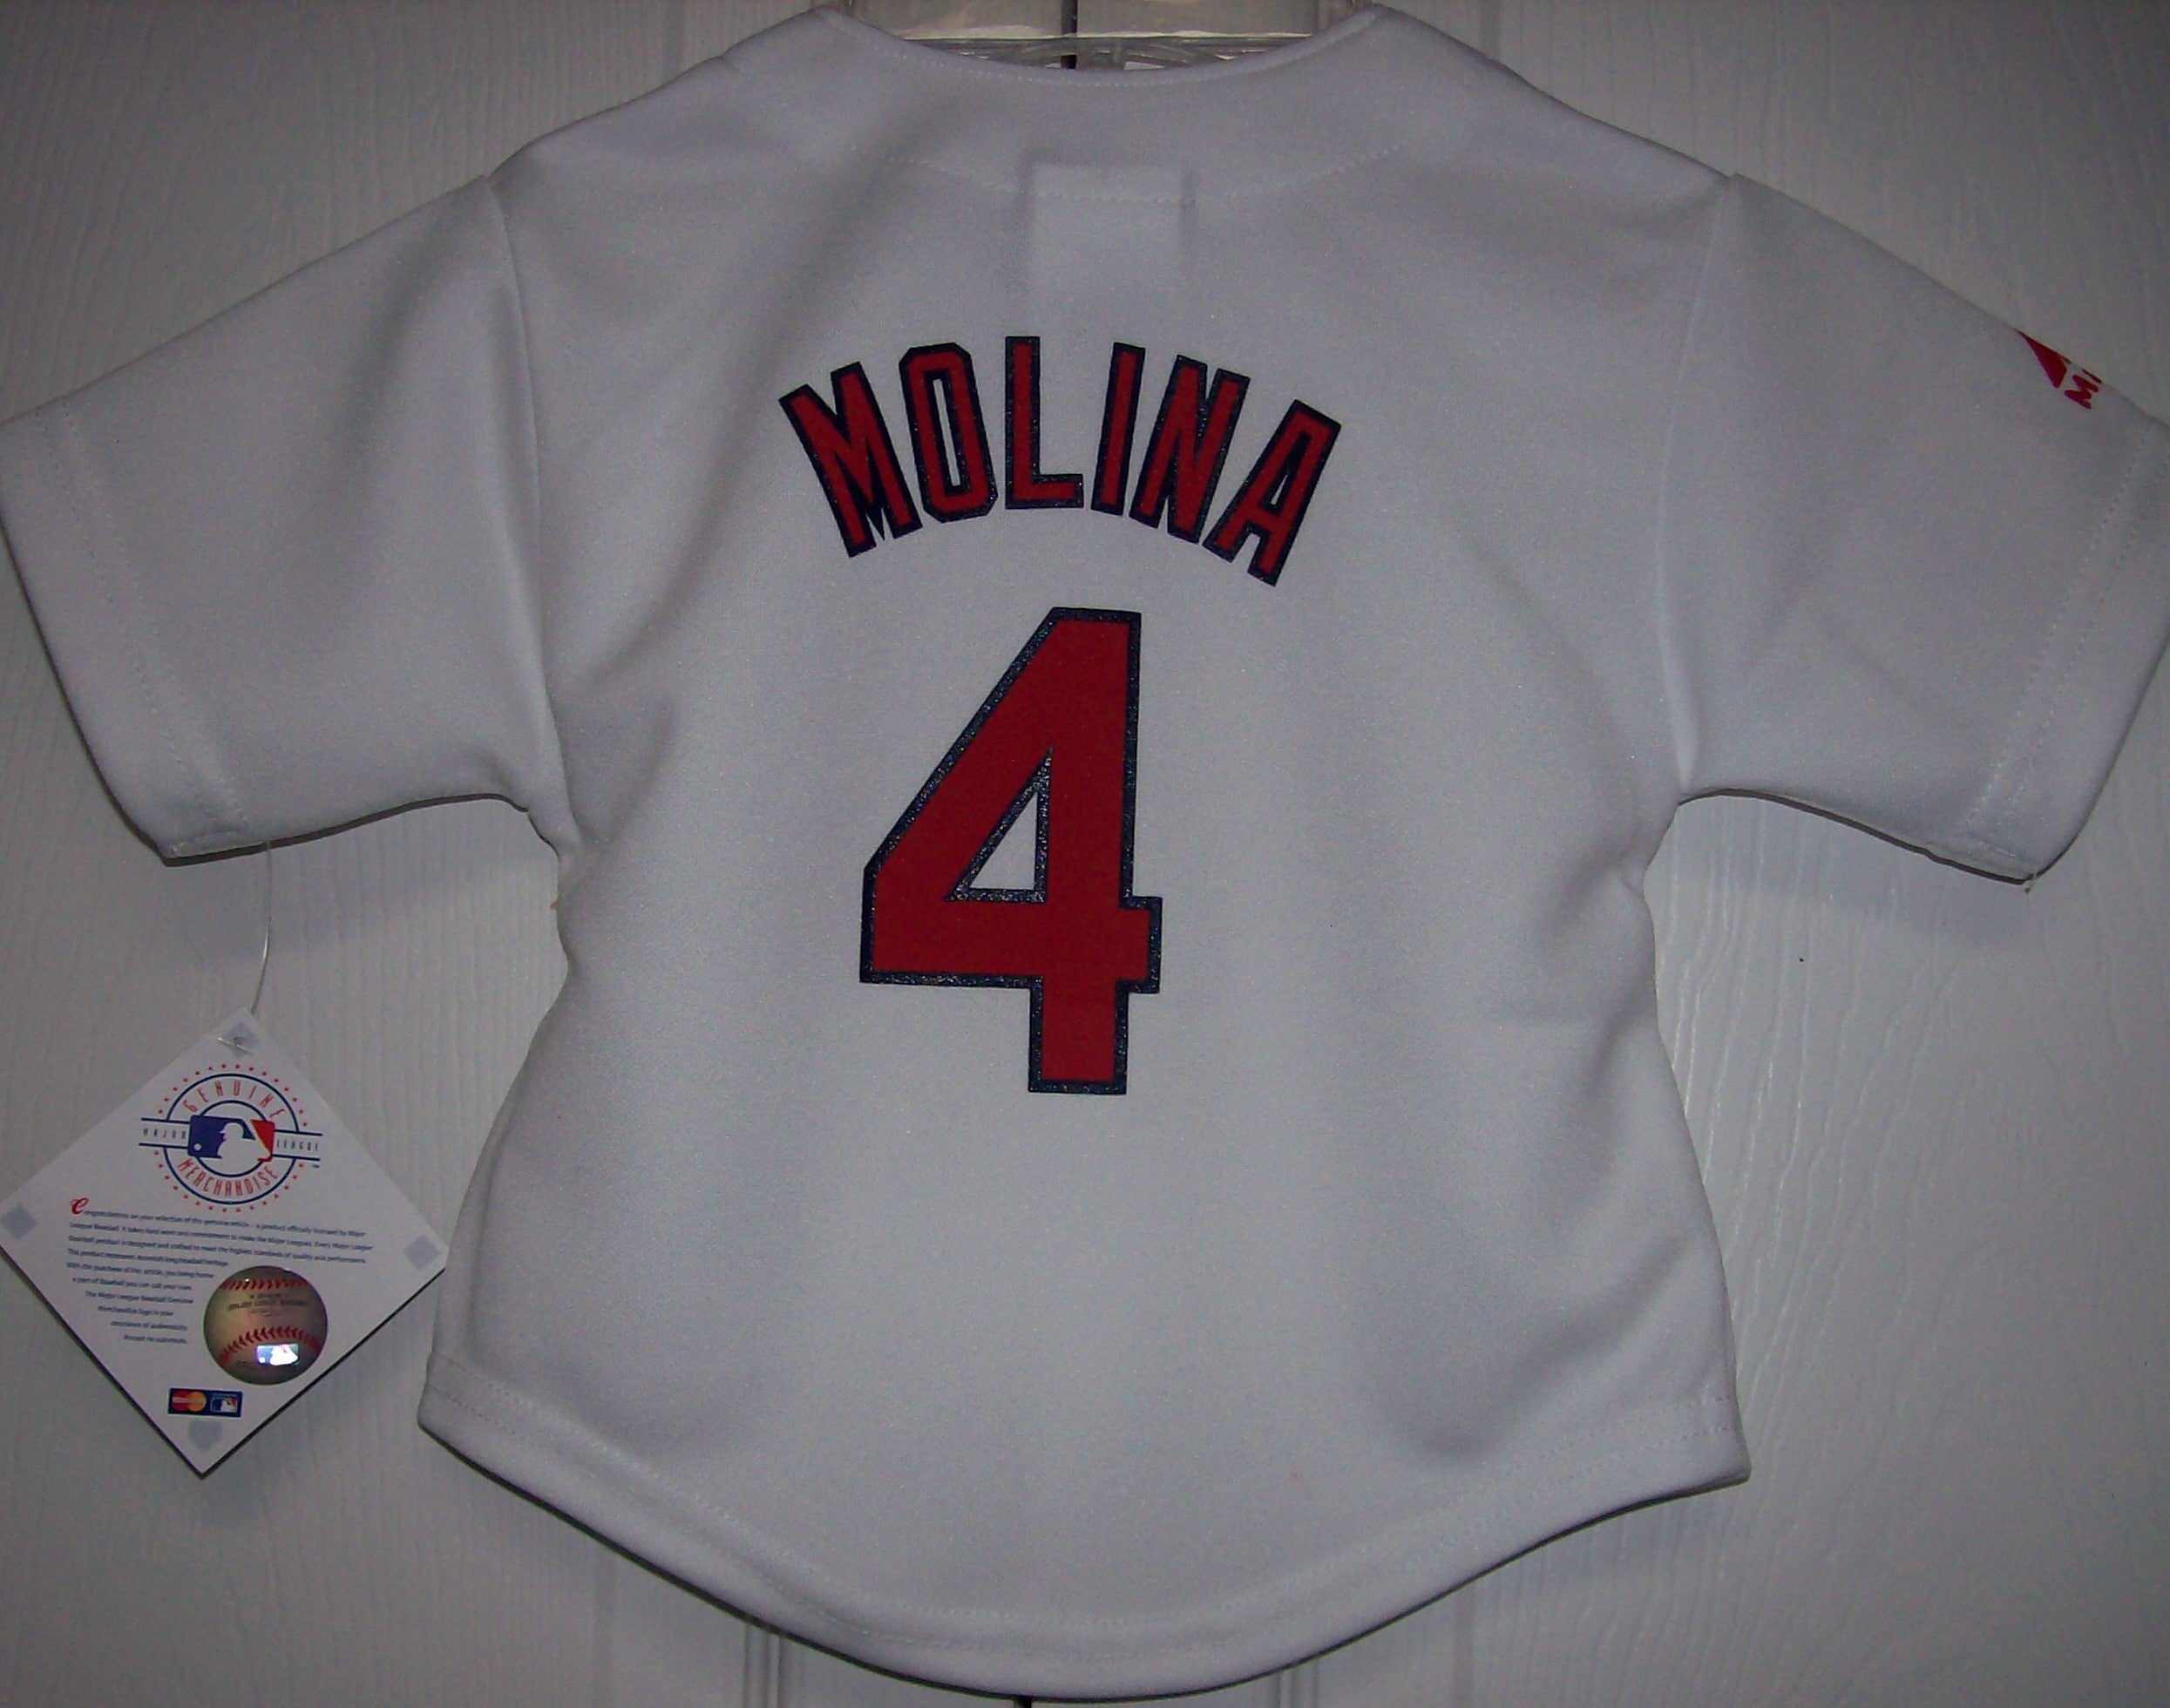 Majestic Babies' St. Louis Cardinals Replica Jersey - White 12 Months